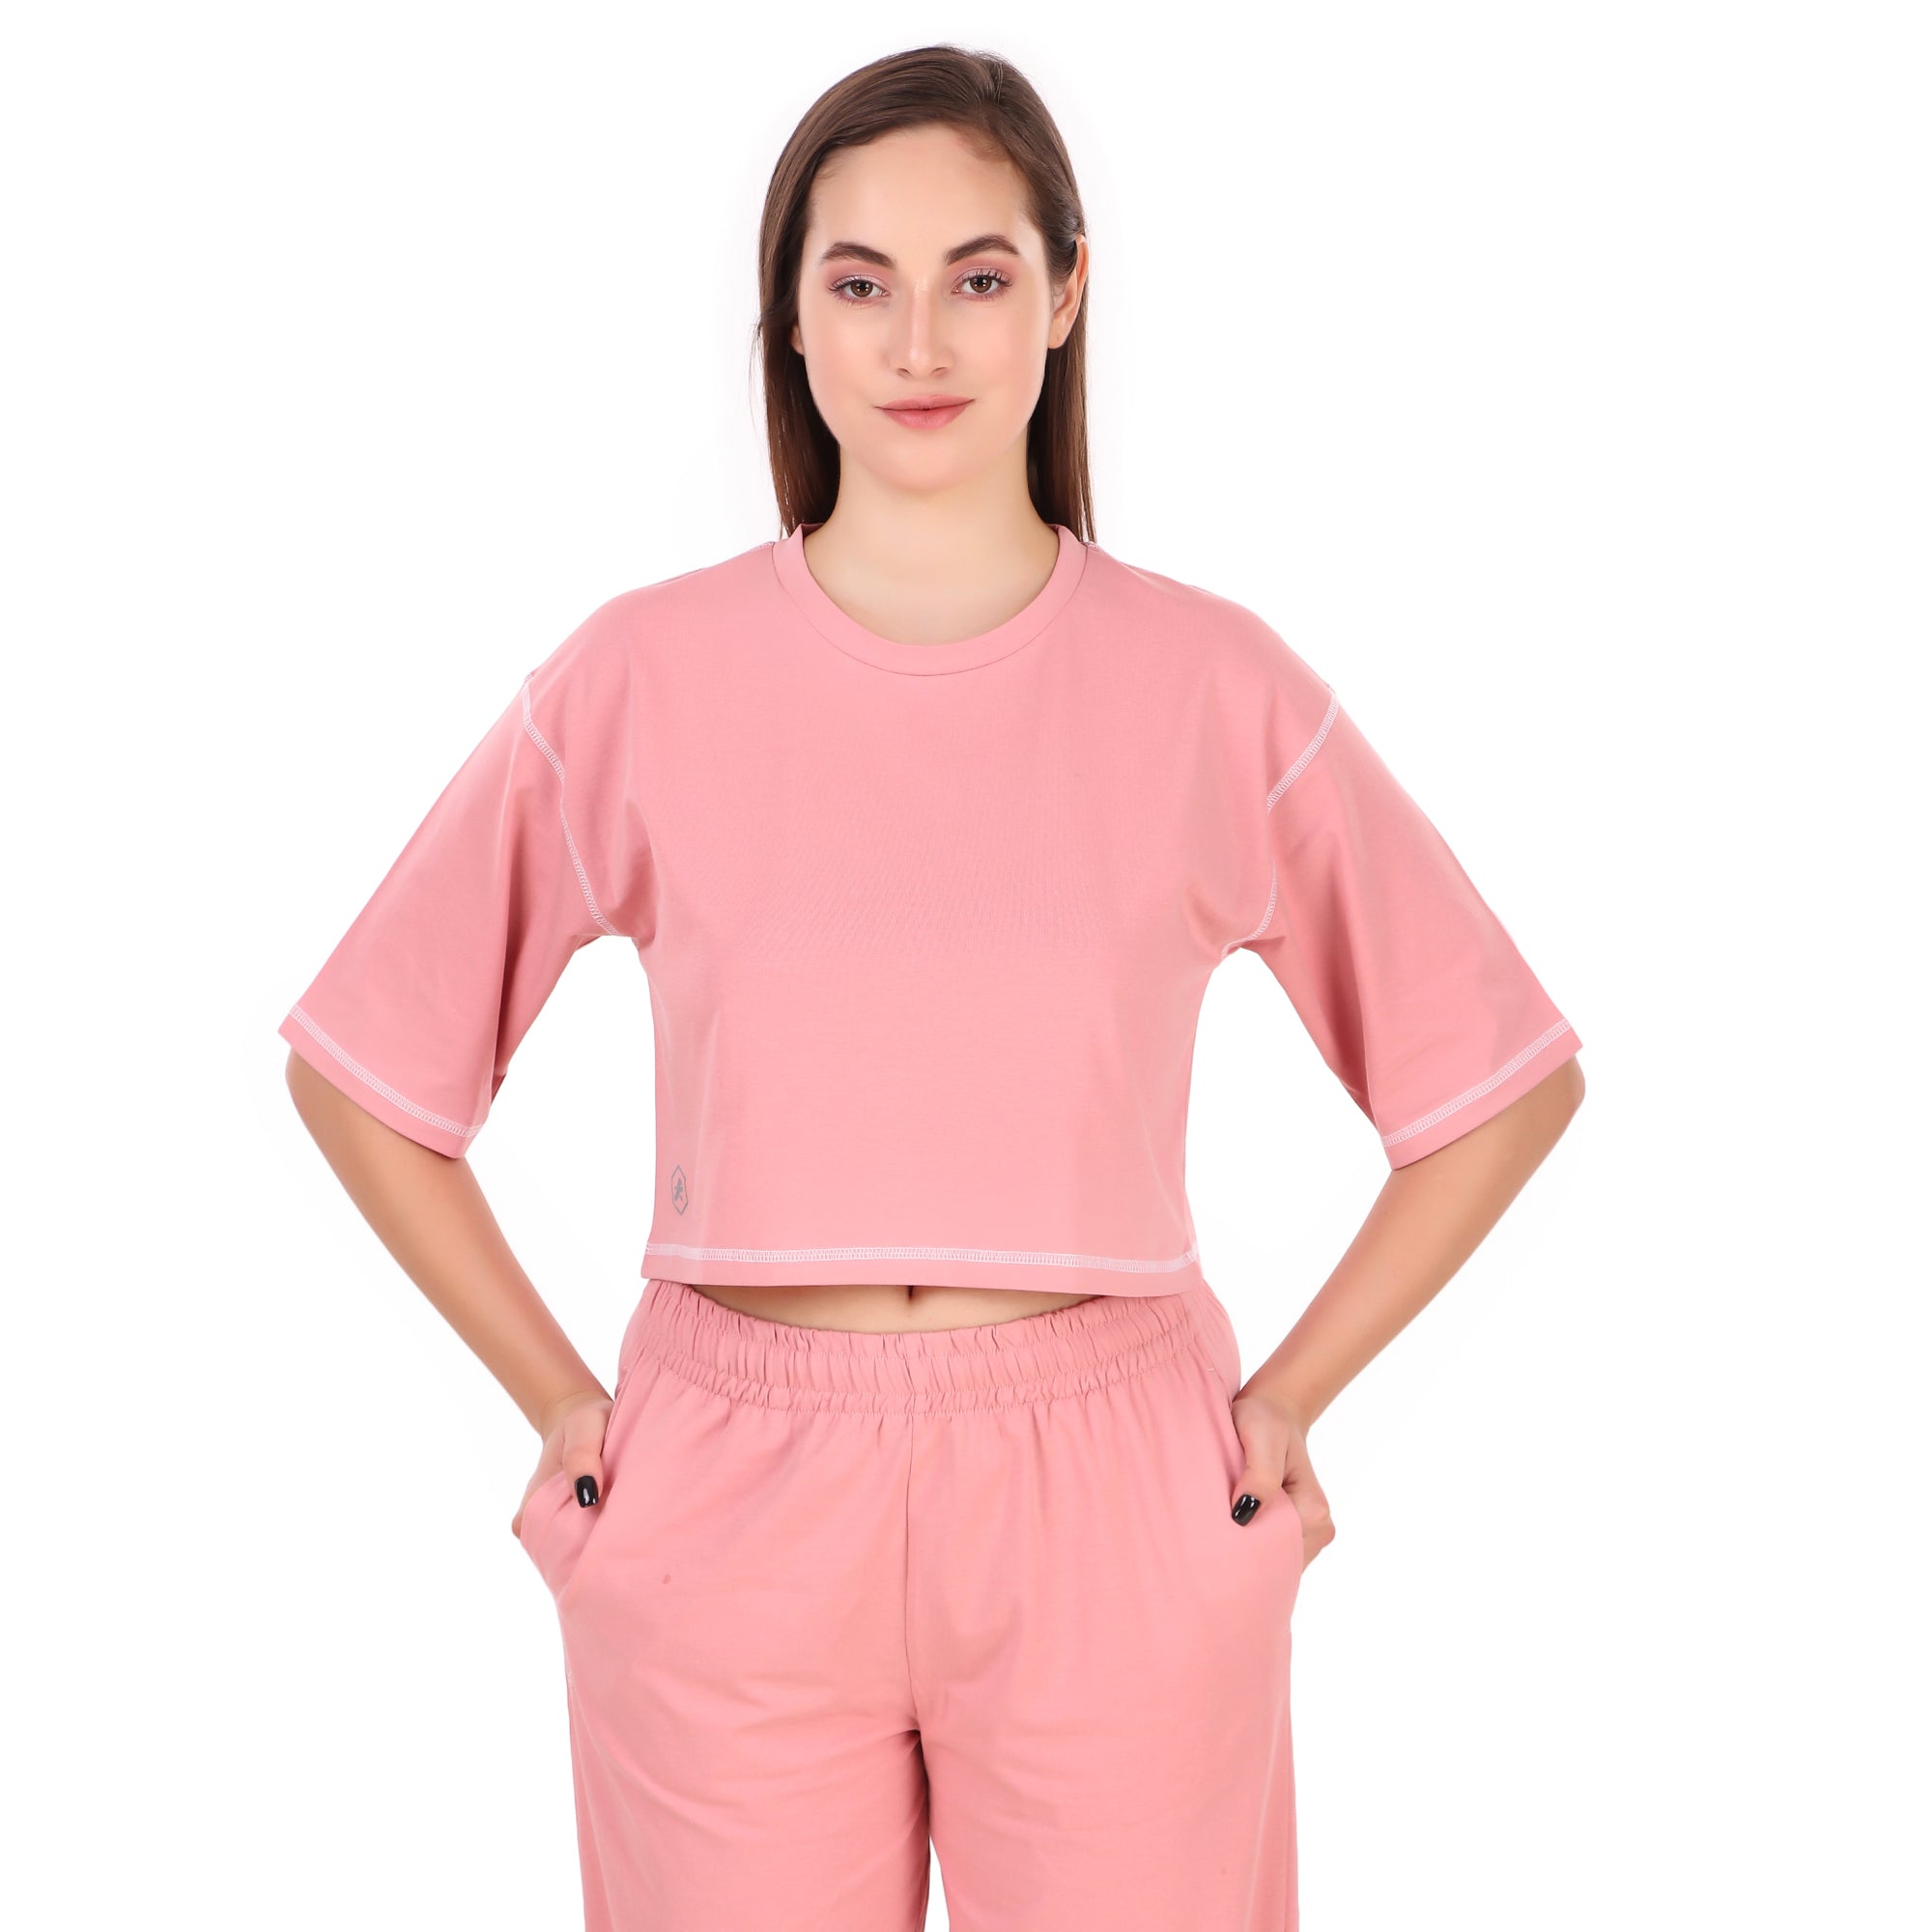 Cotton Crop Top For Women (Soft Pink)